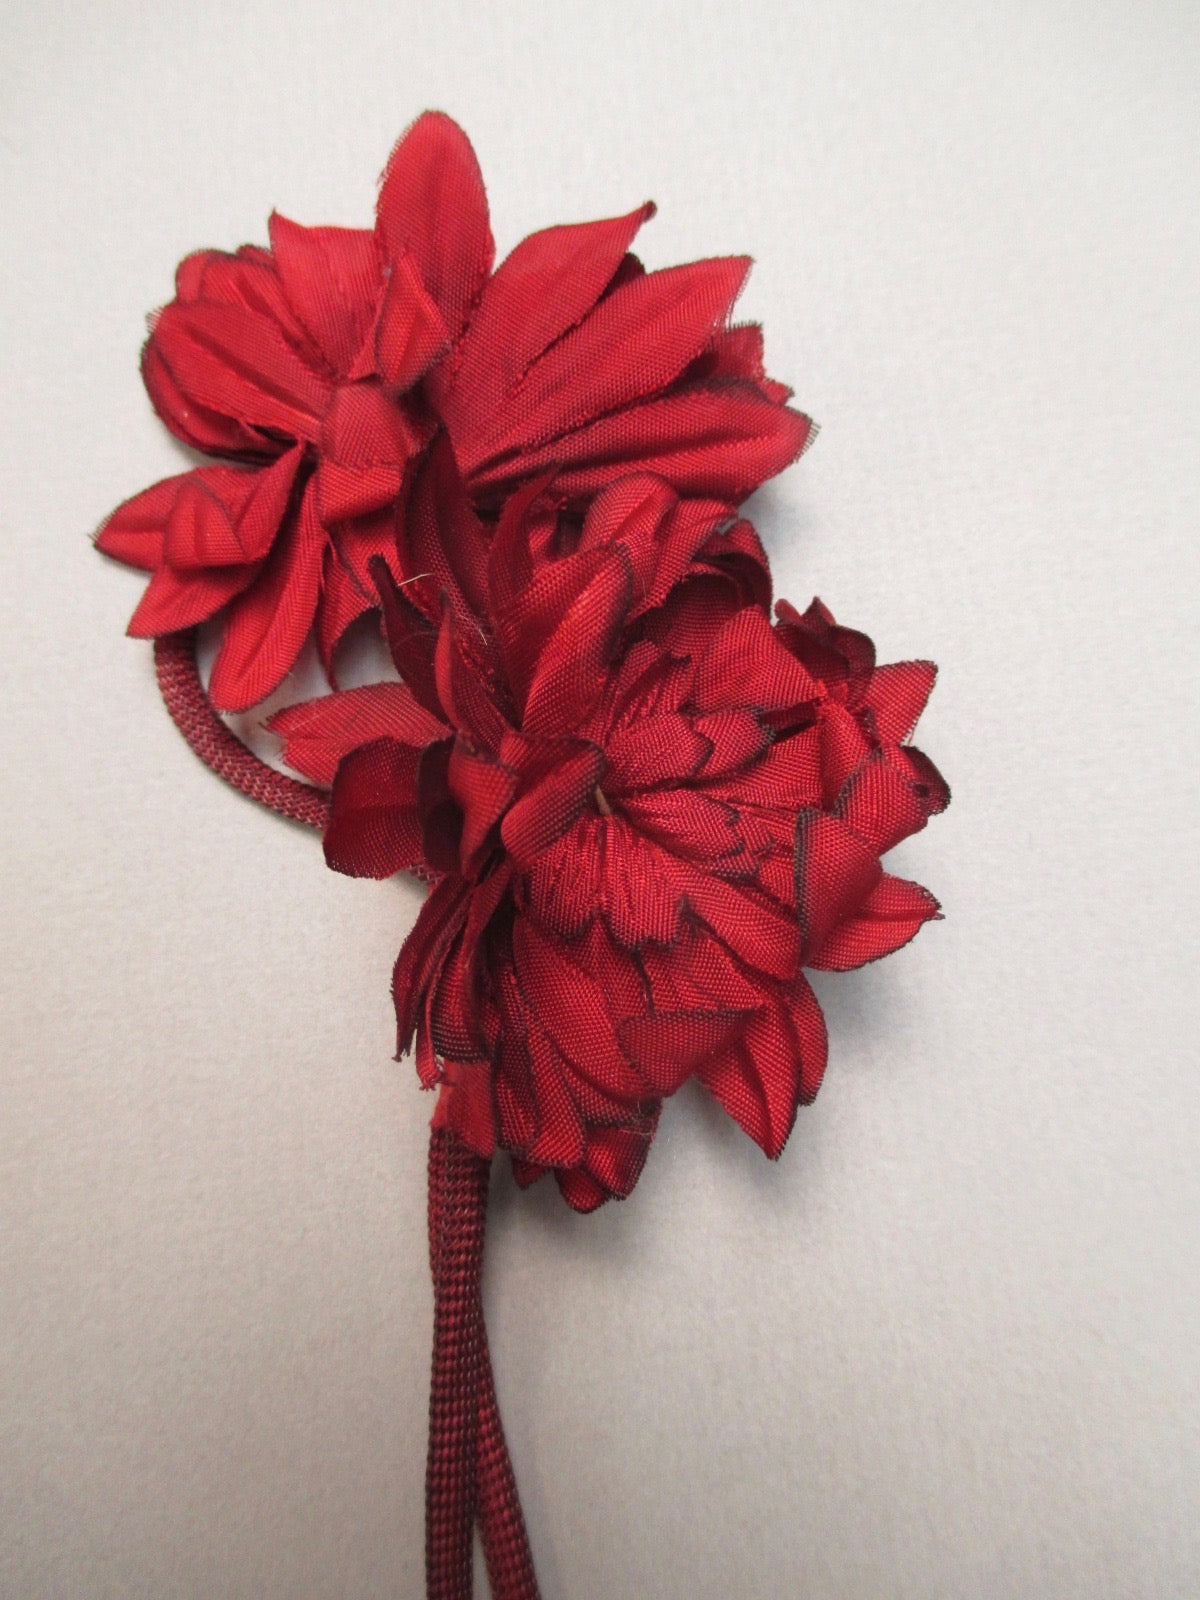 Vintage millinery flowers antique 1930s rayon